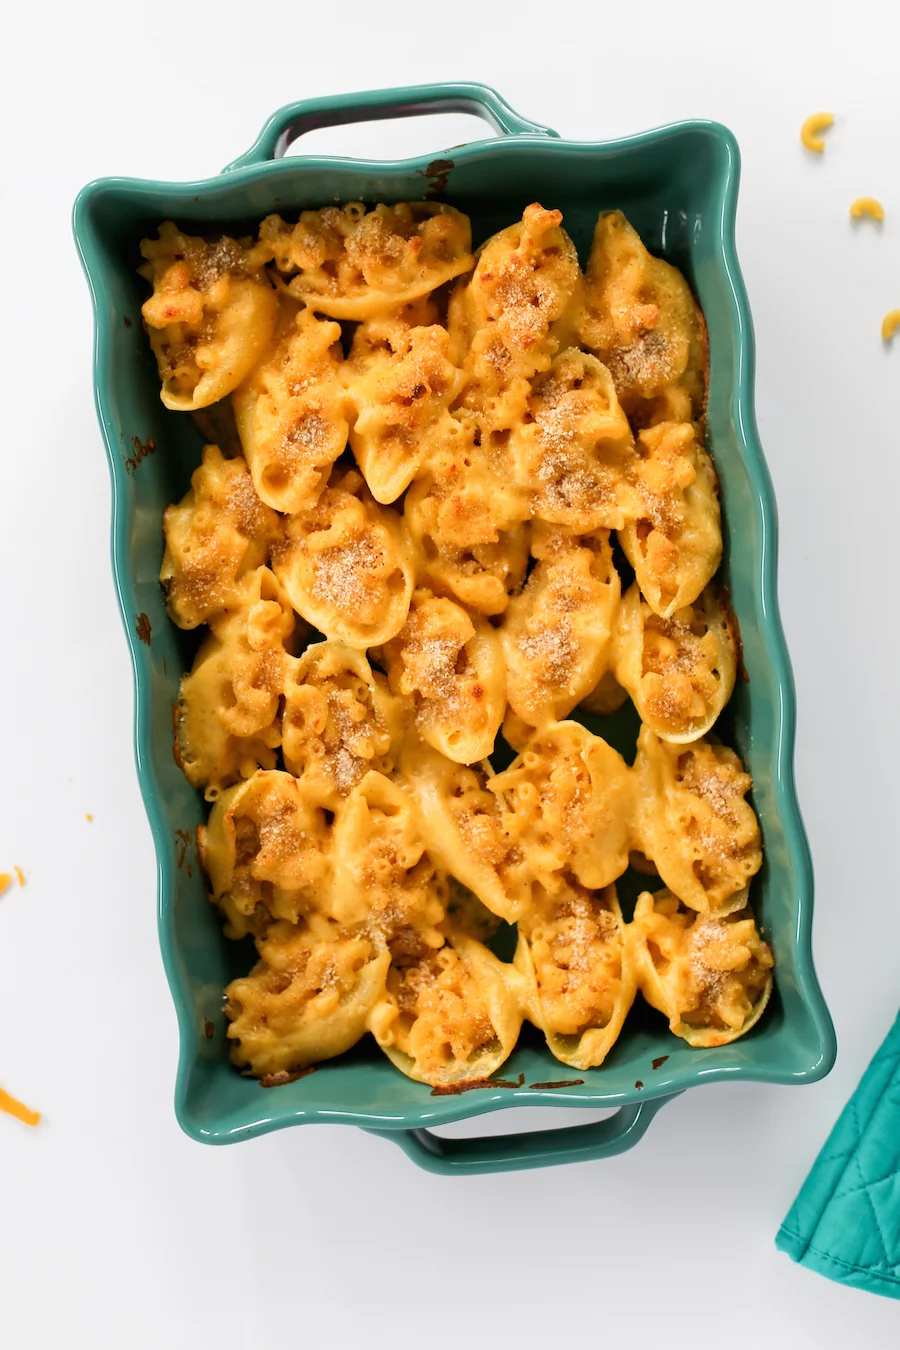 Are you ready for this? Mac and Cheese Stuffed Shells. Yes! That's cheese covered pasta stuffed into BIGGER PASTA and covered with MORE CHEESE! What?!?